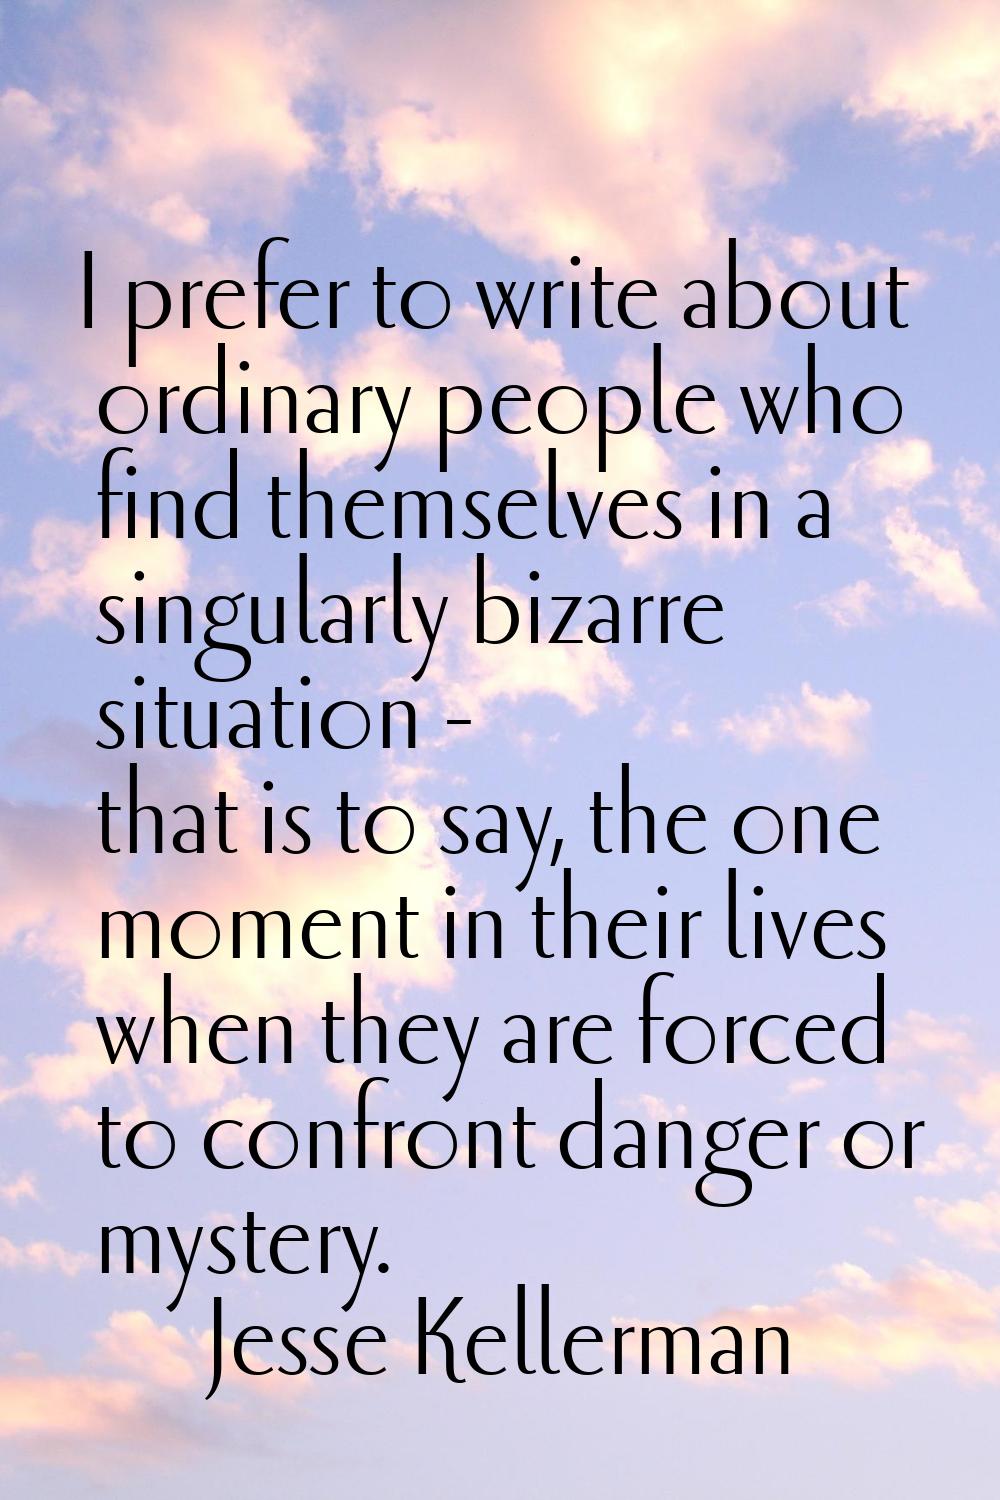 I prefer to write about ordinary people who find themselves in a singularly bizarre situation - tha